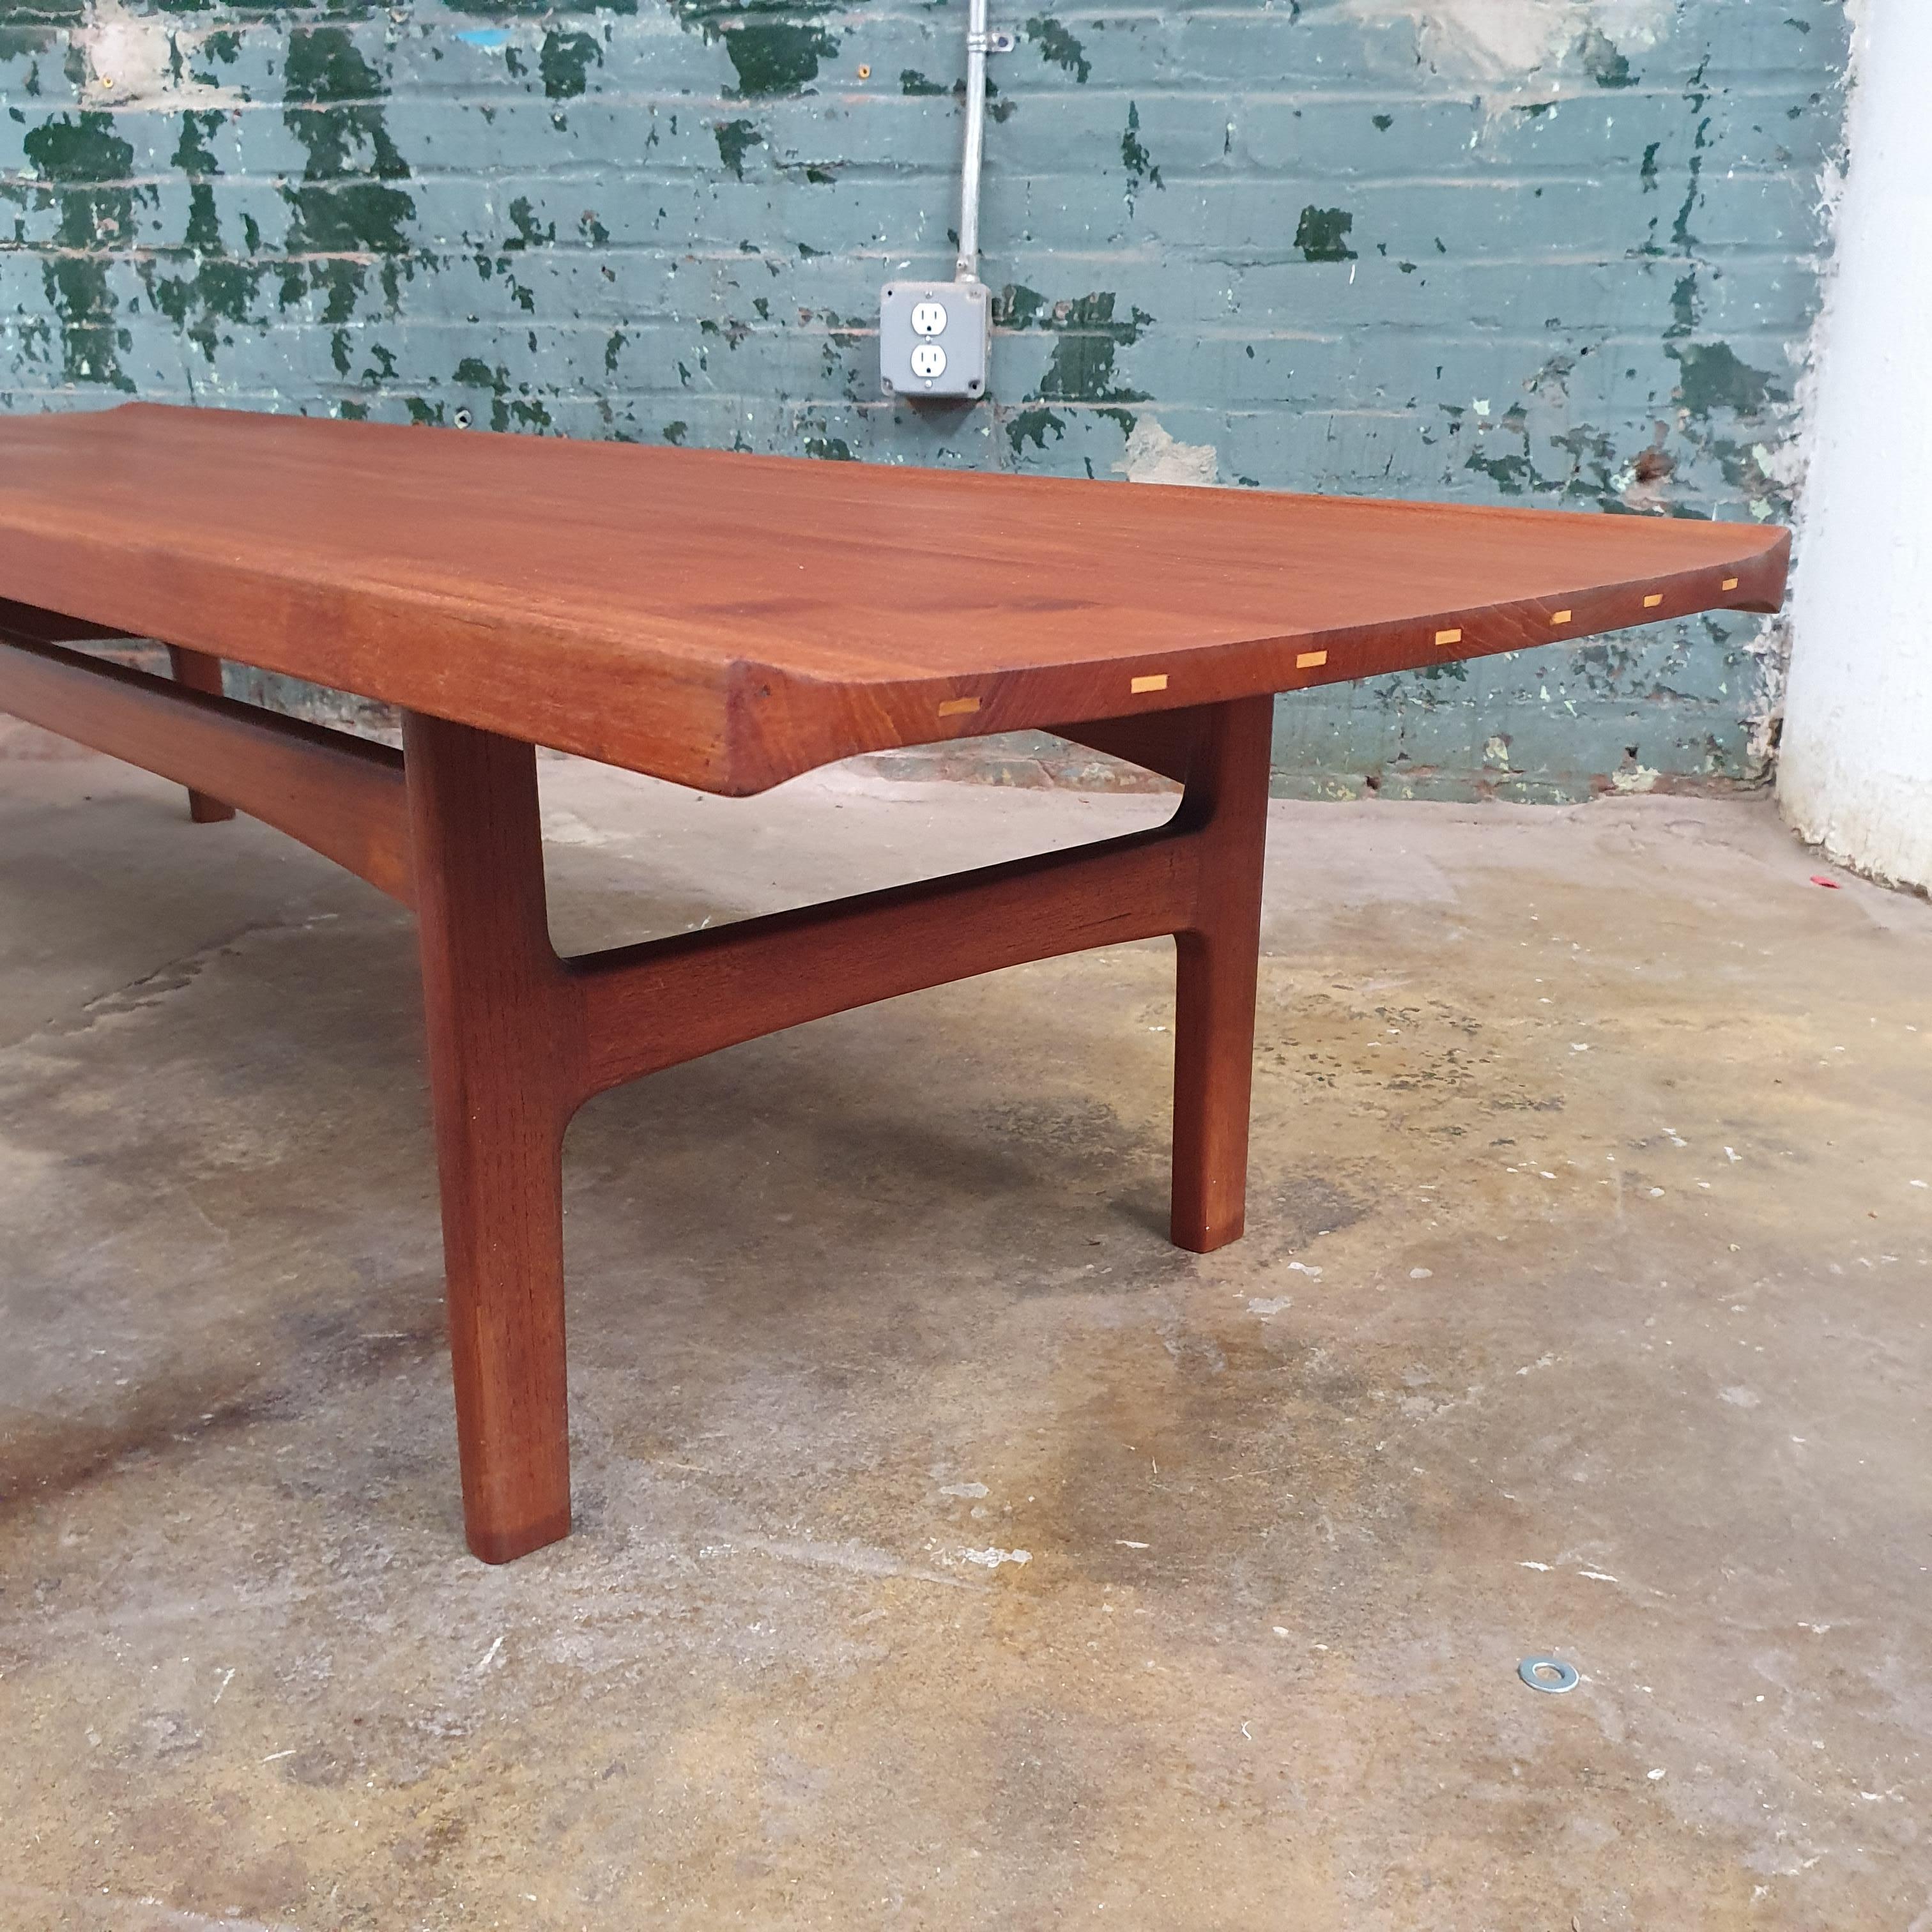 Vintage Solid teak coffee table by Tove and Edvard Kindt-Larsen for AB Seffle Mobelfabrik. Beautifully refinished with great lines. Sculpted sides with exposed joinery on the ends.

Measures: 72w x 22d x 15h.